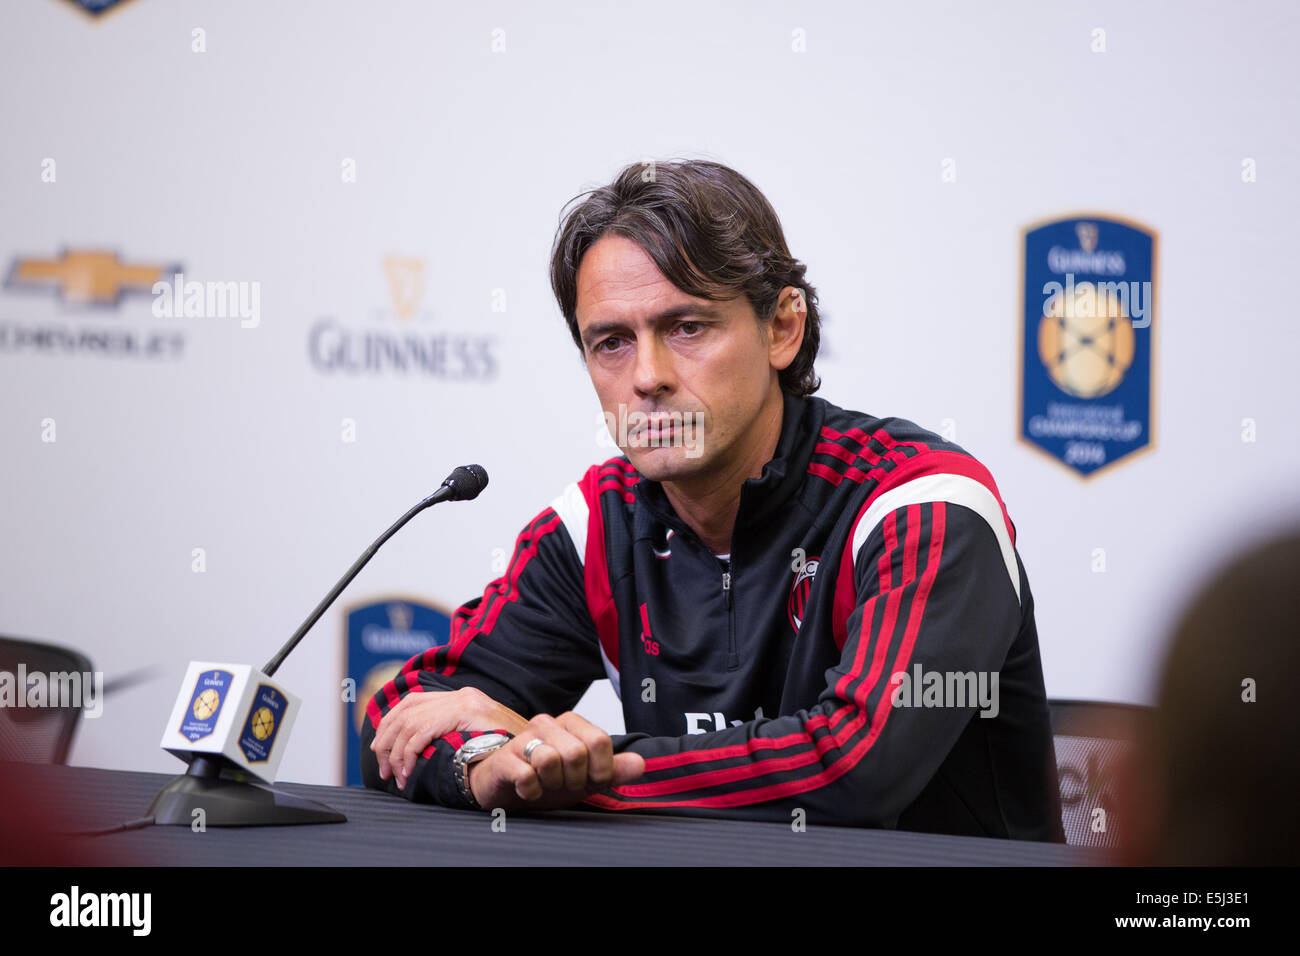 Charlotte, North Carolina, USA. 1st Aug, 2014. AC Milan Manager FILIPPO INZAGHI during a press conference for the 2014 Guinness International Champions Cup match between AC Milan and Liverpool at Bank of America Stadium in Charlotte, NC. Credit:  Jason Walle/ZUMA Wire/Alamy Live News Stock Photo